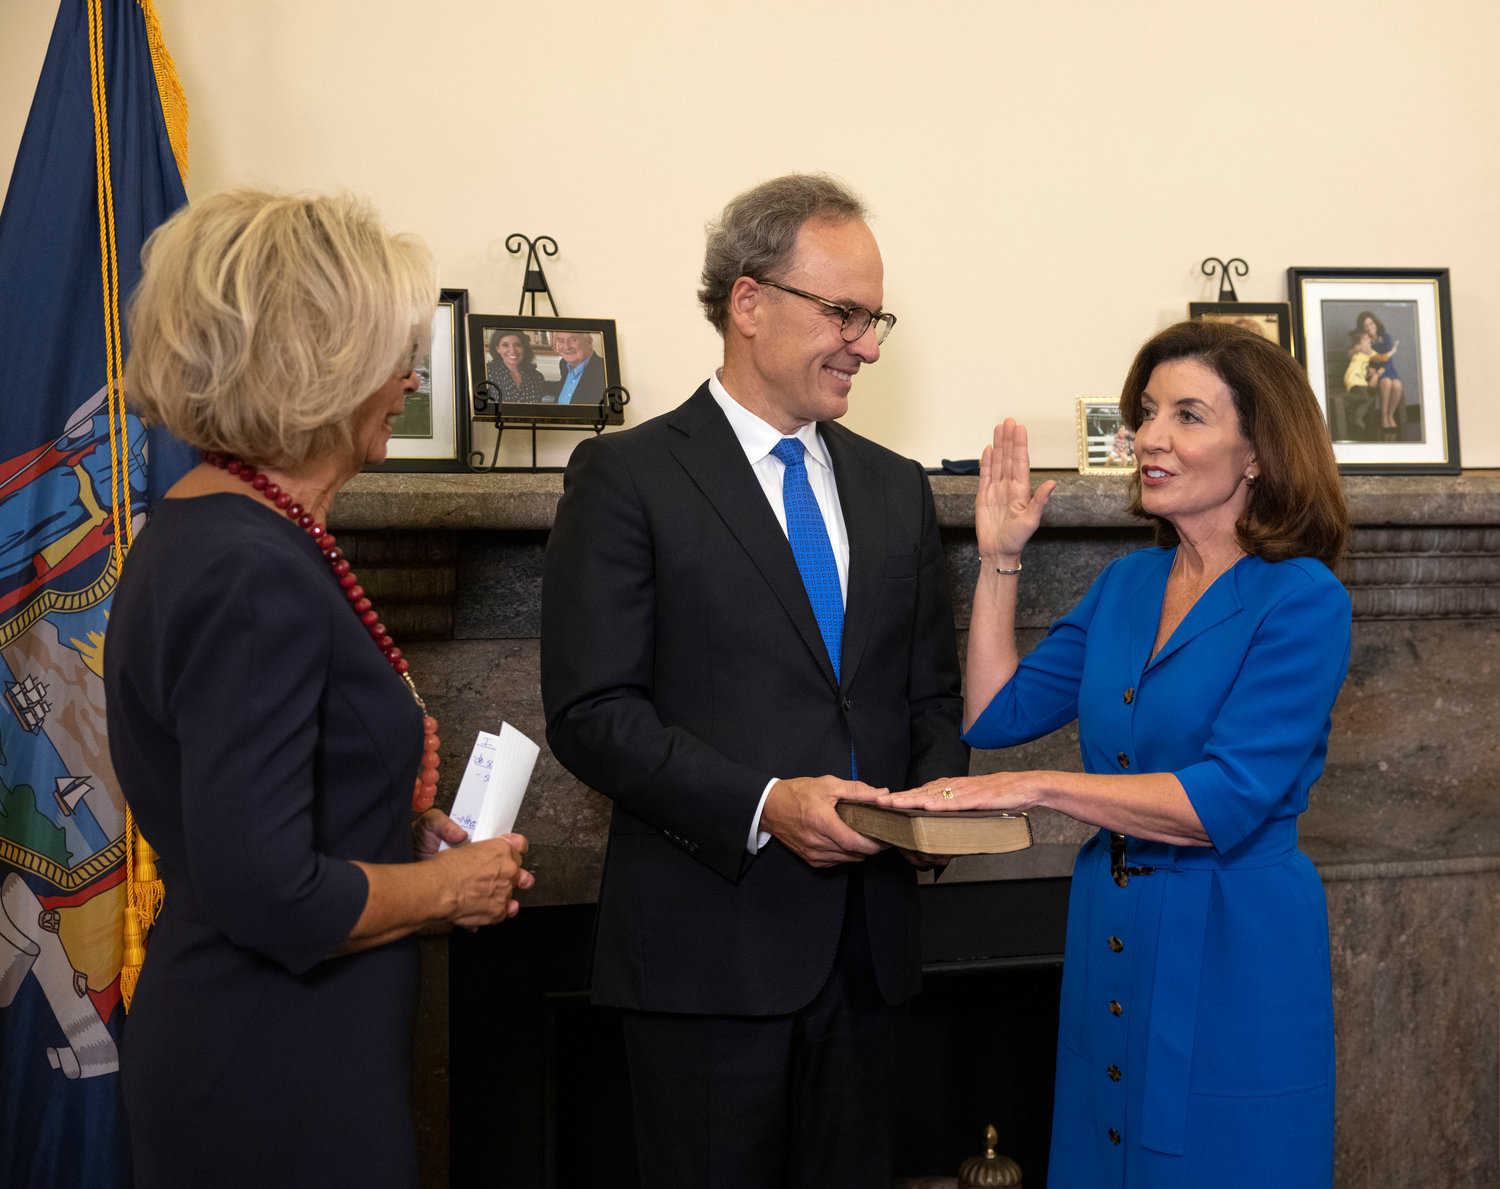 Kathy Hochul is sworn in as New York's 57th governor by chief judge Janet DiFiore while husband Bill Hochul holds the Bible. She will fill out the remainder of Andrew Cuomo's third term, who announced his resignation two weeks ago after a sexual harassment scandal rocked his office.